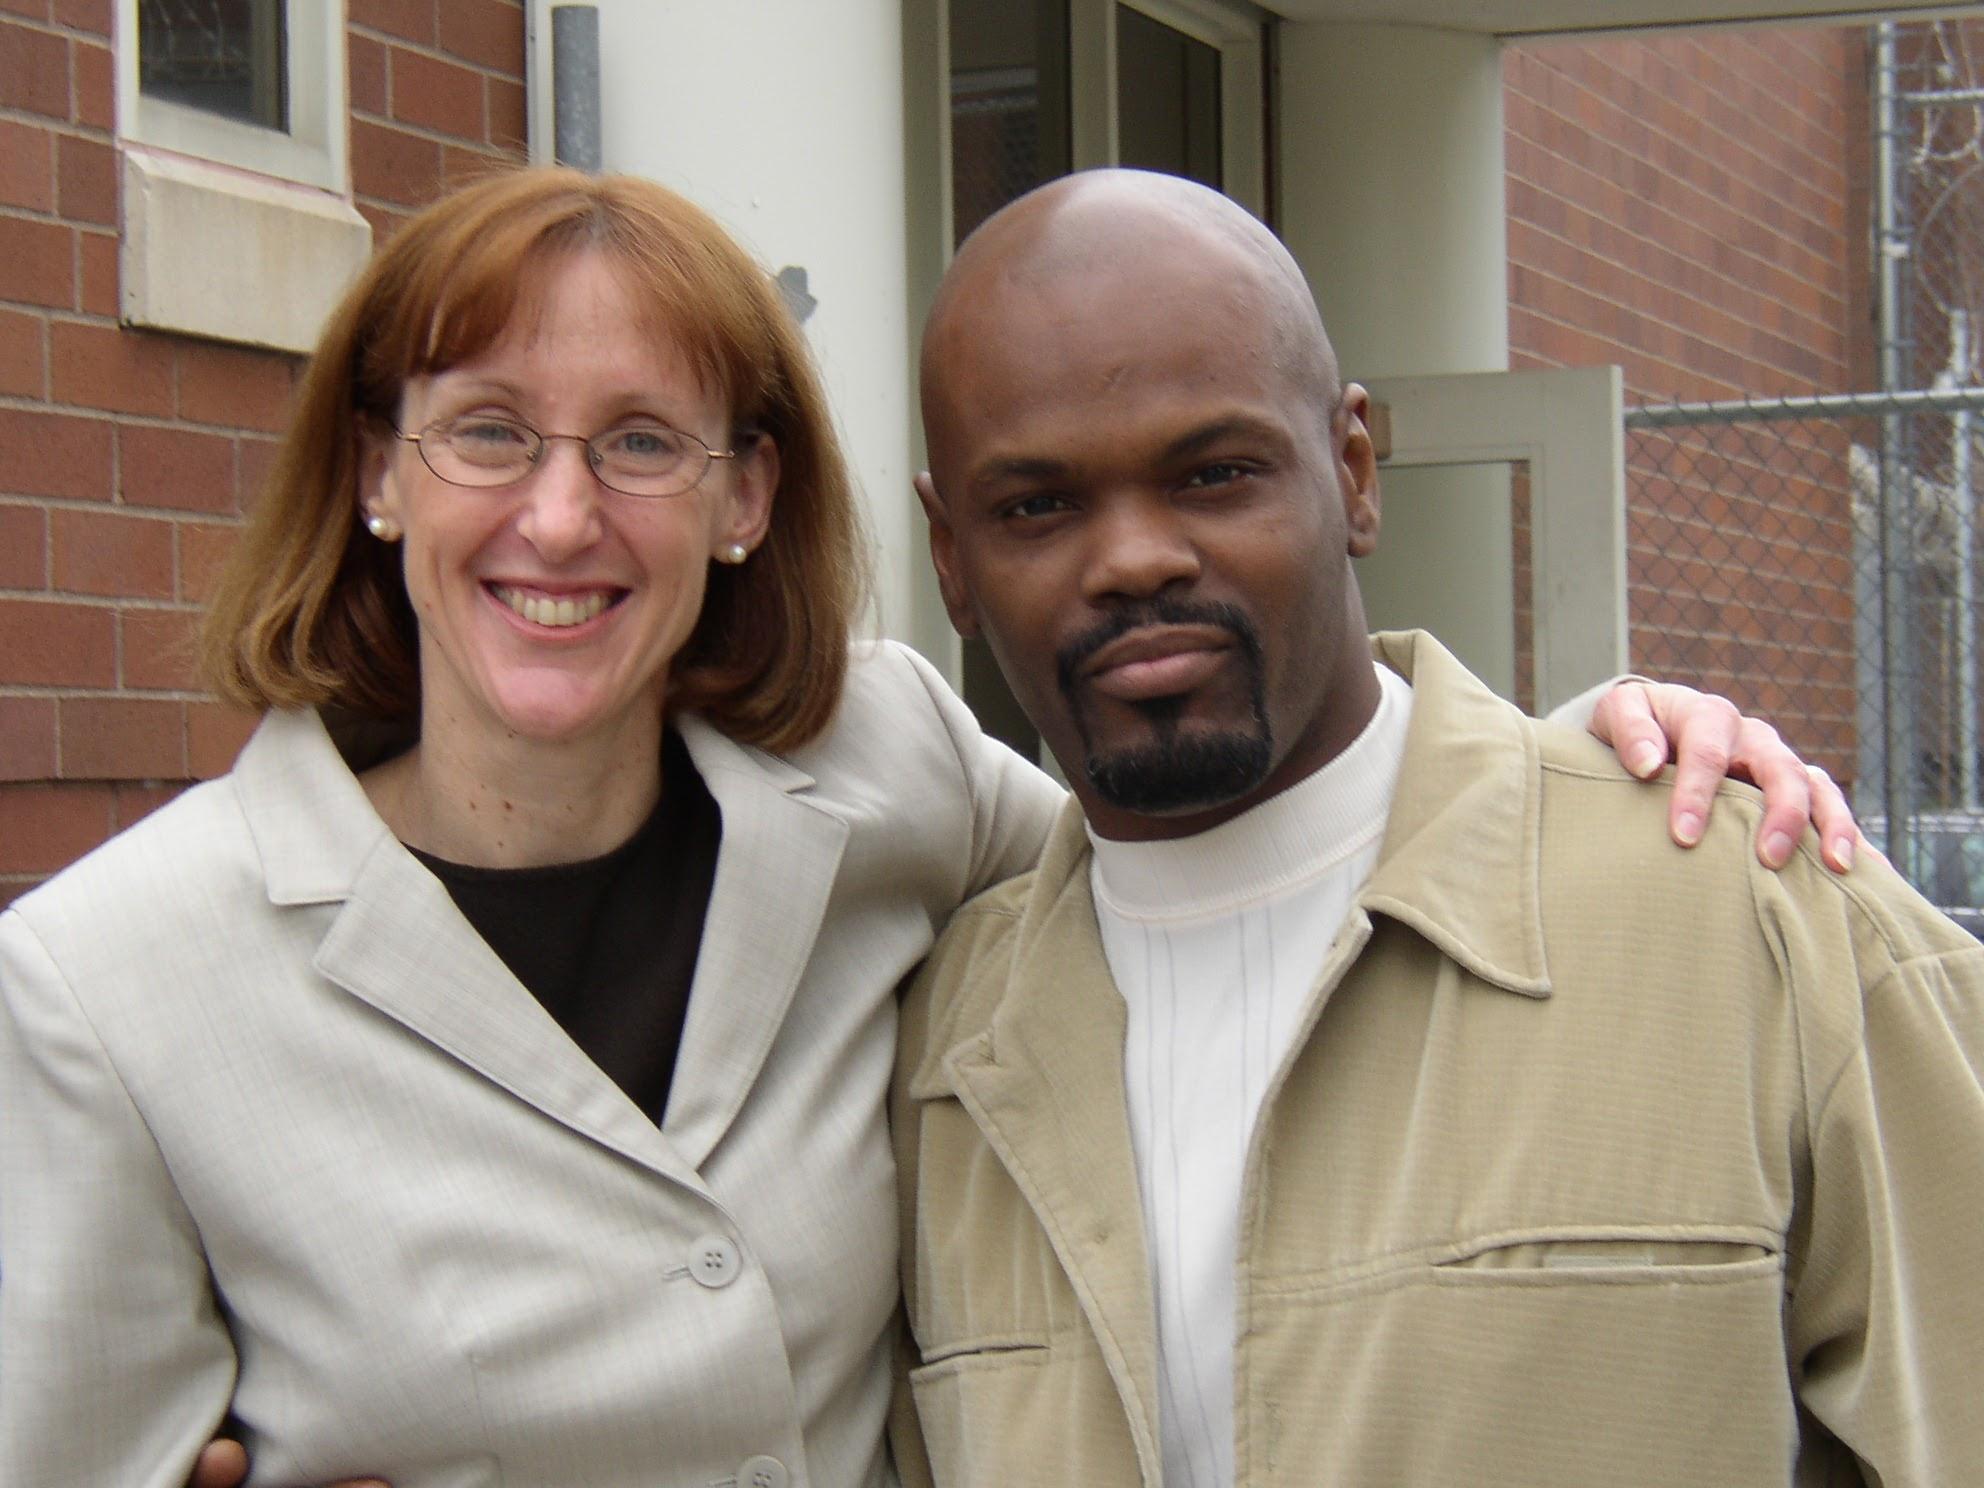 Karen Daniel poses with Dana Holland on June 6, 2003, the day he was released from prison. (Courtesy of Karen Daniel / Center on Wrongful Convictions)